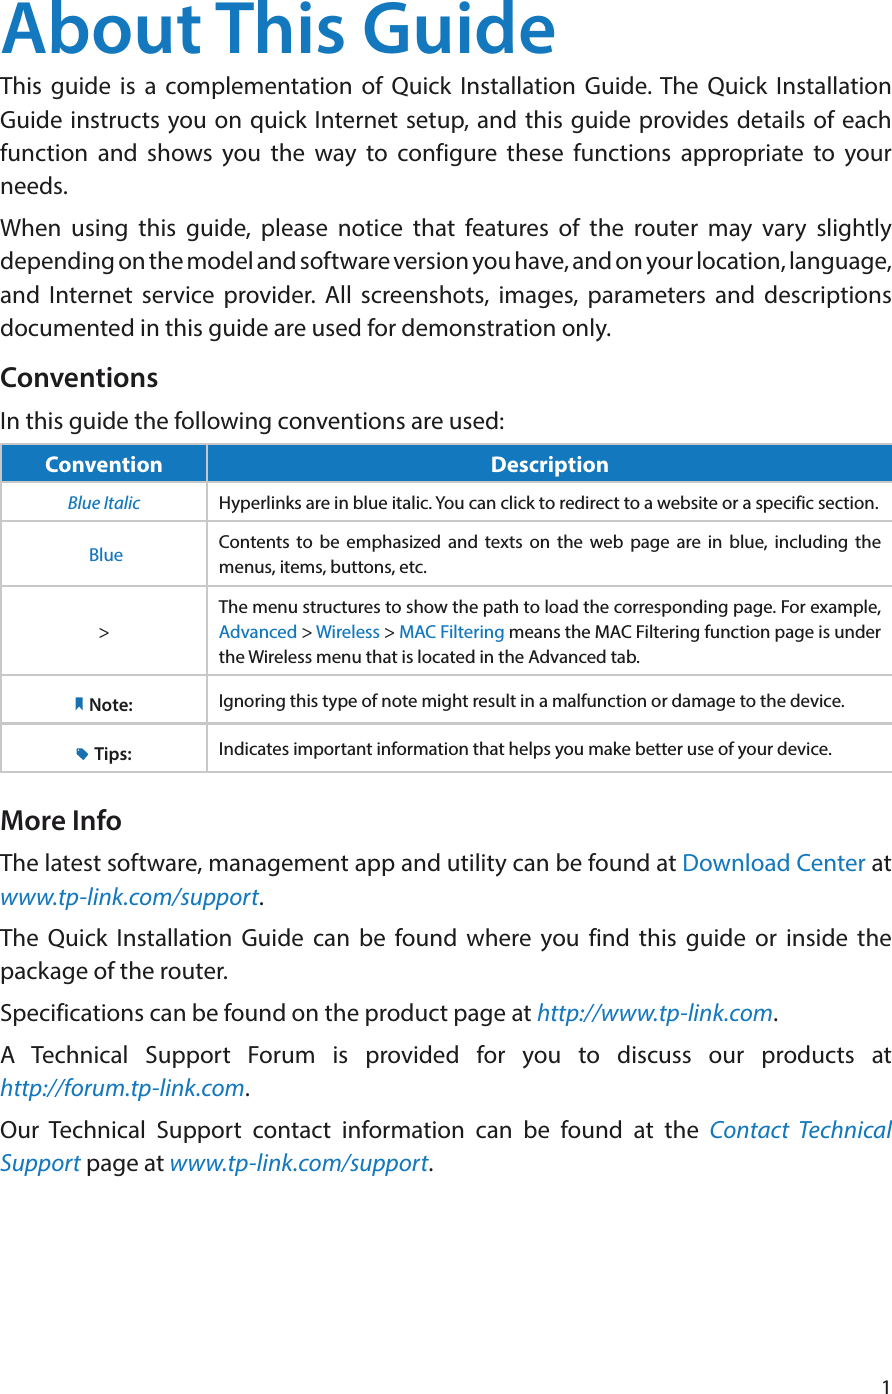 1About This GuideThis guide is a complementation of Quick Installation Guide. The Quick Installation Guide instructs you on quick Internet setup, and this guide provides details of each function and shows you the way to configure these functions appropriate to your needs. When using this guide, please notice that features of the router may vary slightly depending on the model and software version you have, and on your location, language, and Internet service provider. All screenshots, images, parameters and descriptions documented in this guide are used for demonstration only.ConventionsIn this guide the following conventions are used:Convention DescriptionBlue Italic Hyperlinks are in blue italic. You can click to redirect to a website or a specific section. Blue Contents to be emphasized and texts on the web page are in blue, including the menus, items, buttons, etc.&gt;The menu structures to show the path to load the corresponding page. For example, Advanced &gt; Wireless &gt; MAC Filtering means the MAC Filtering function page is under the Wireless menu that is located in the Advanced tab.Note: Ignoring this type of note might result in a malfunction or damage to the device.Tips: Indicates important information that helps you make better use of your device.More InfoThe latest software, management app and utility can be found at Download Center at www.tp-link.com/support.The Quick Installation Guide can be found where you find this guide or inside the package of the router.Specifications can be found on the product page at http://www.tp-link.com.A Technical Support Forum is provided for you to discuss our products at  http://forum.tp-link.com.Our Technical Support contact information can be found at the Contact Technical Support page at www.tp-link.com/support.